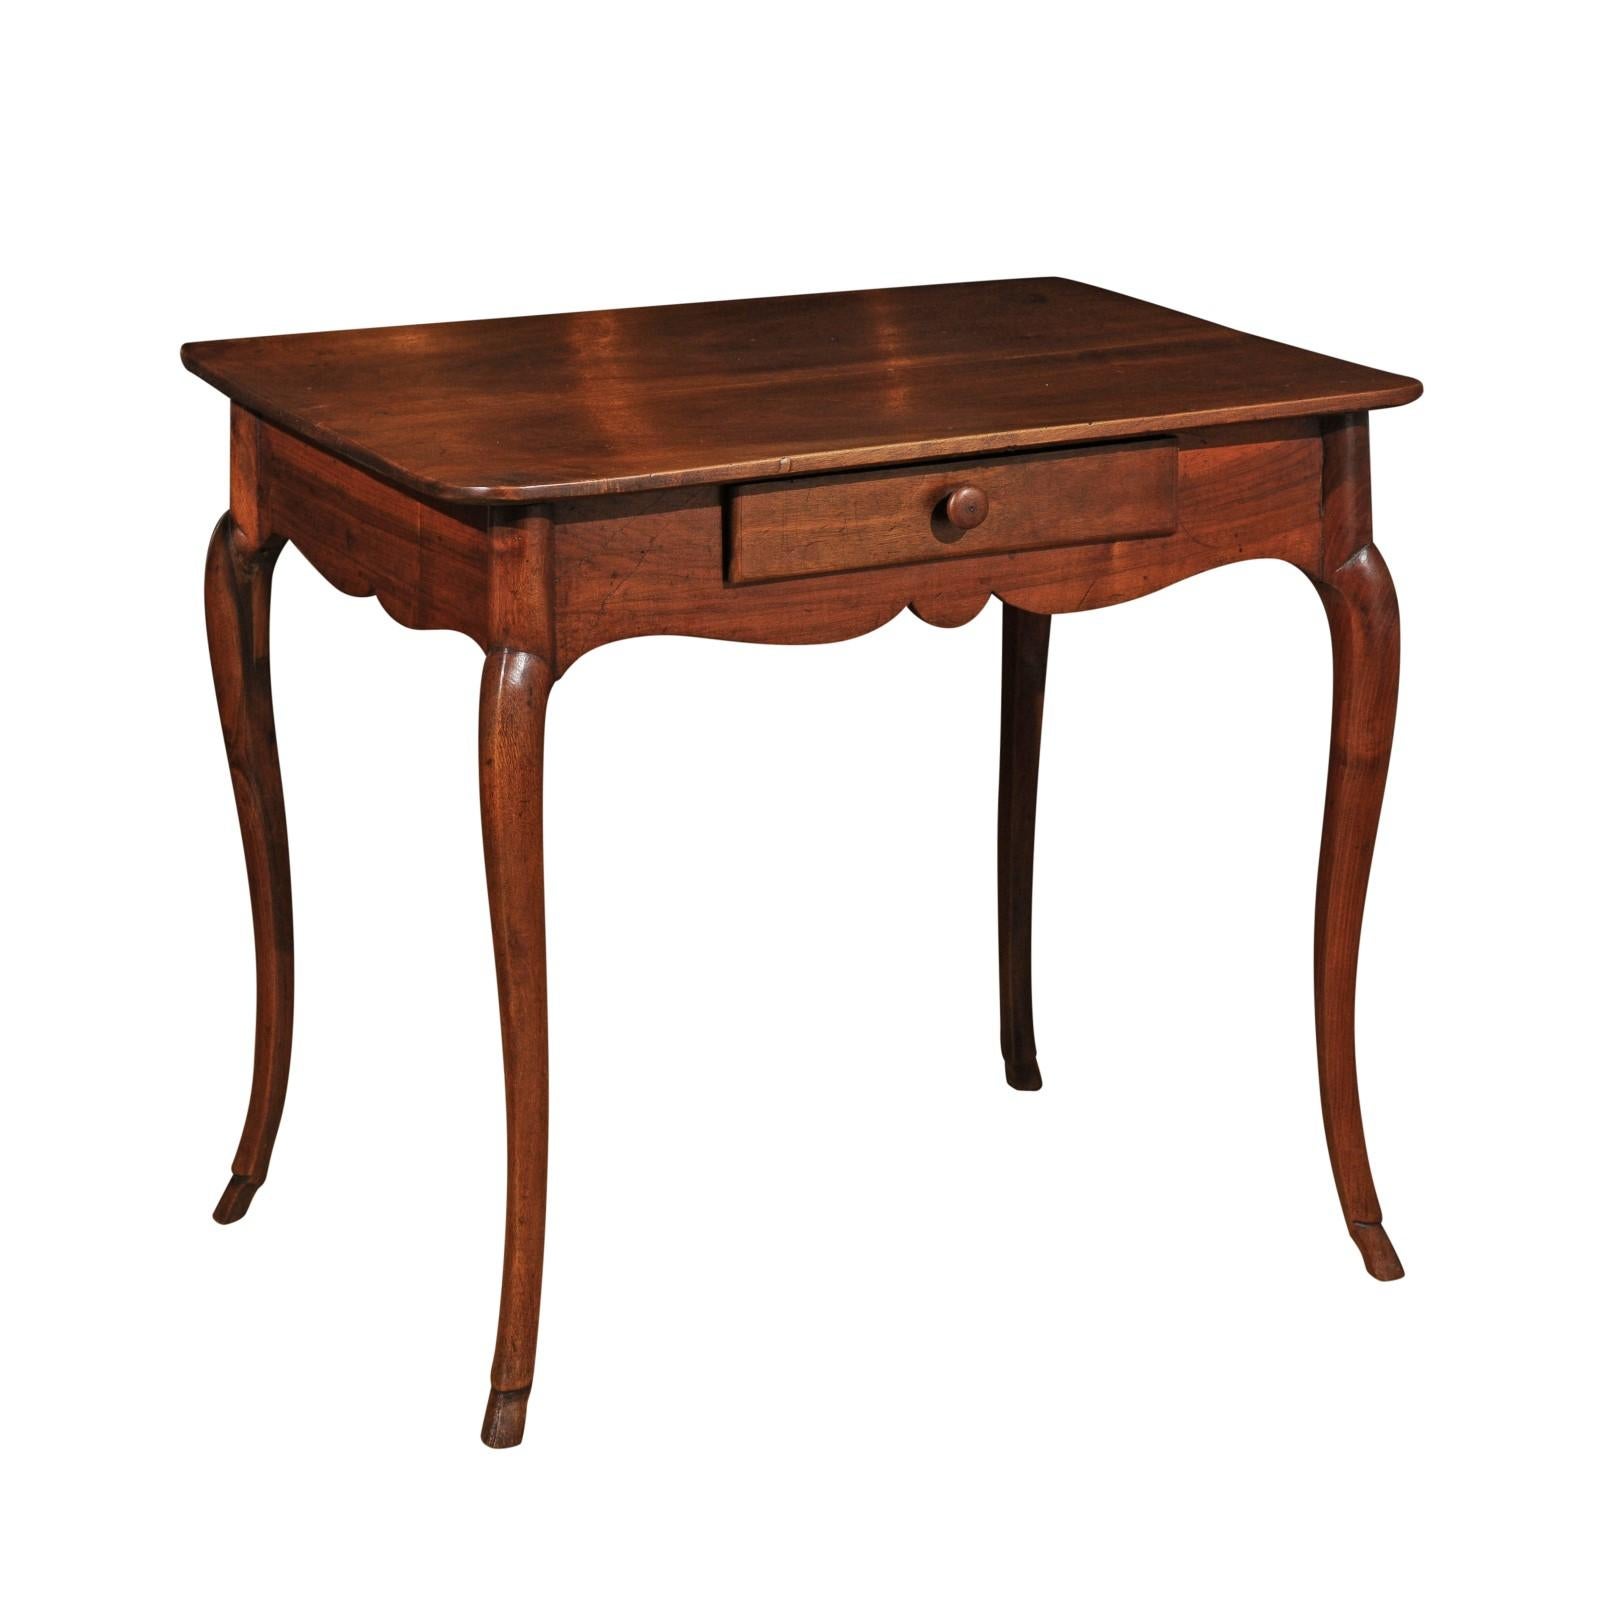 French 1750s Louis XV Walnut Table with Acacia Legs from the Rhône Valley